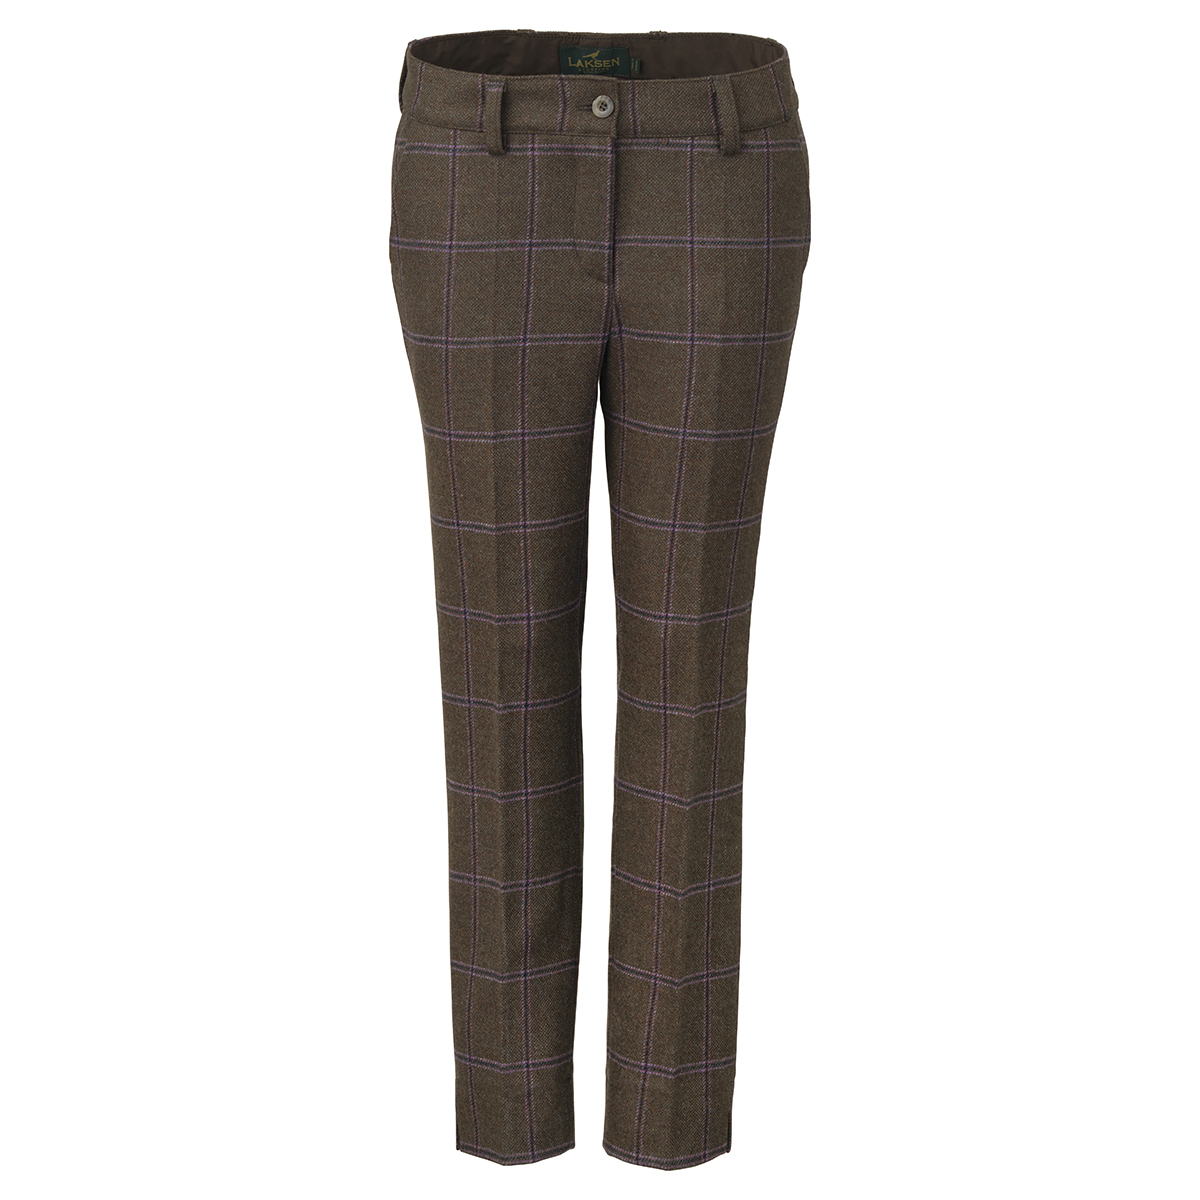 Highland Tweed Trousers : Made To Measure Custom Jeans For Men & Women,  MakeYourOwnJeans®